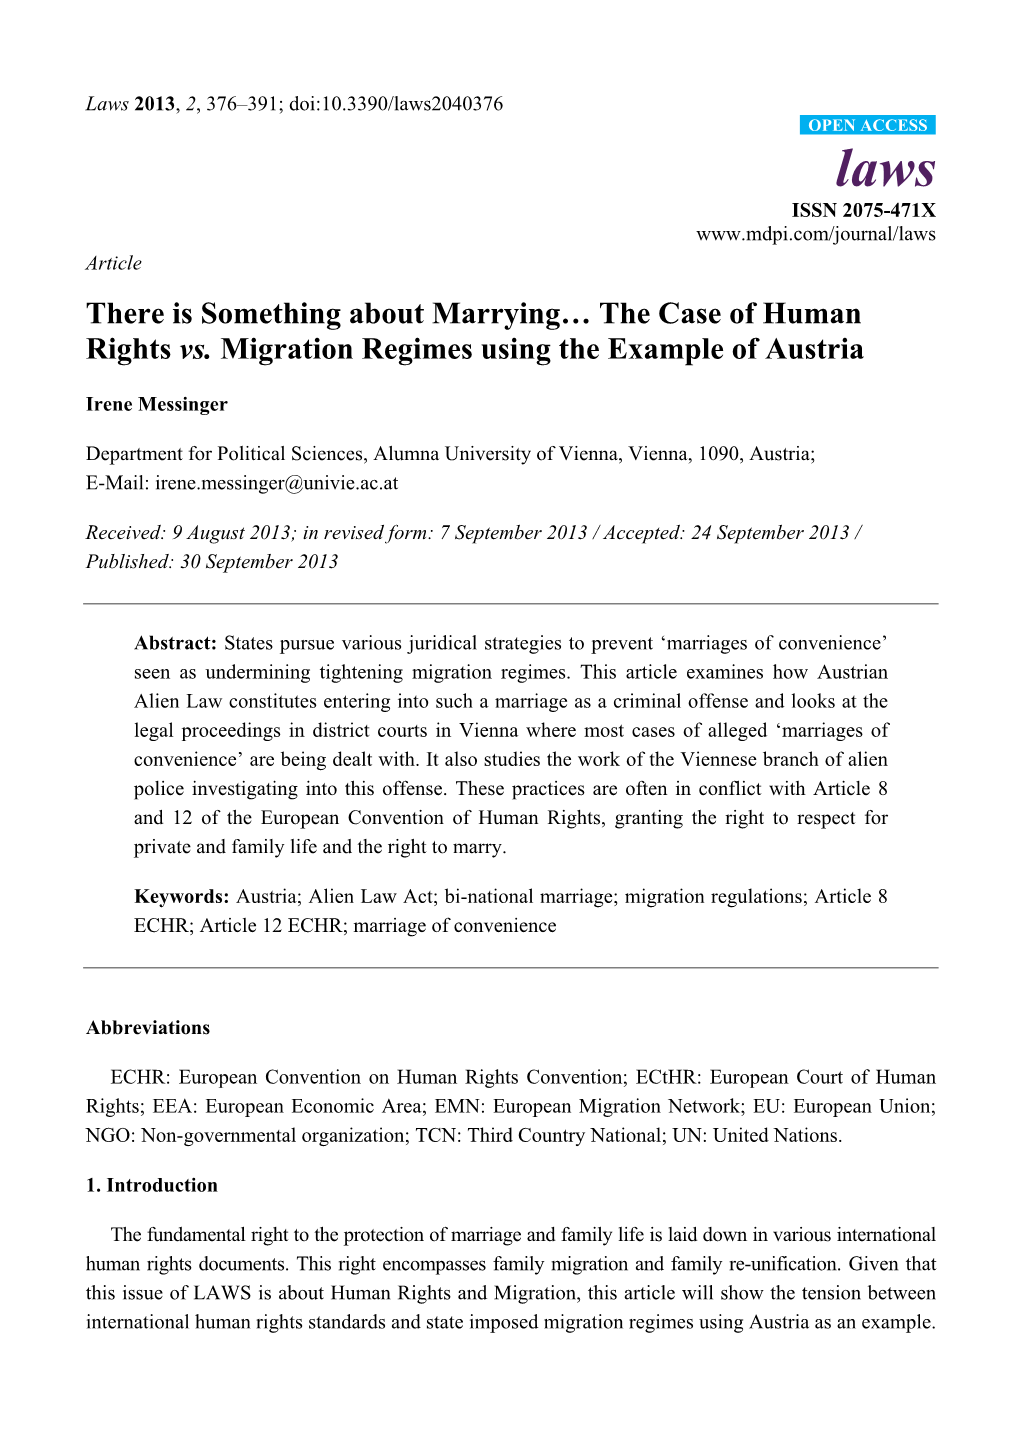 There Is Something About Marrying… the Case of Human Rights Vs